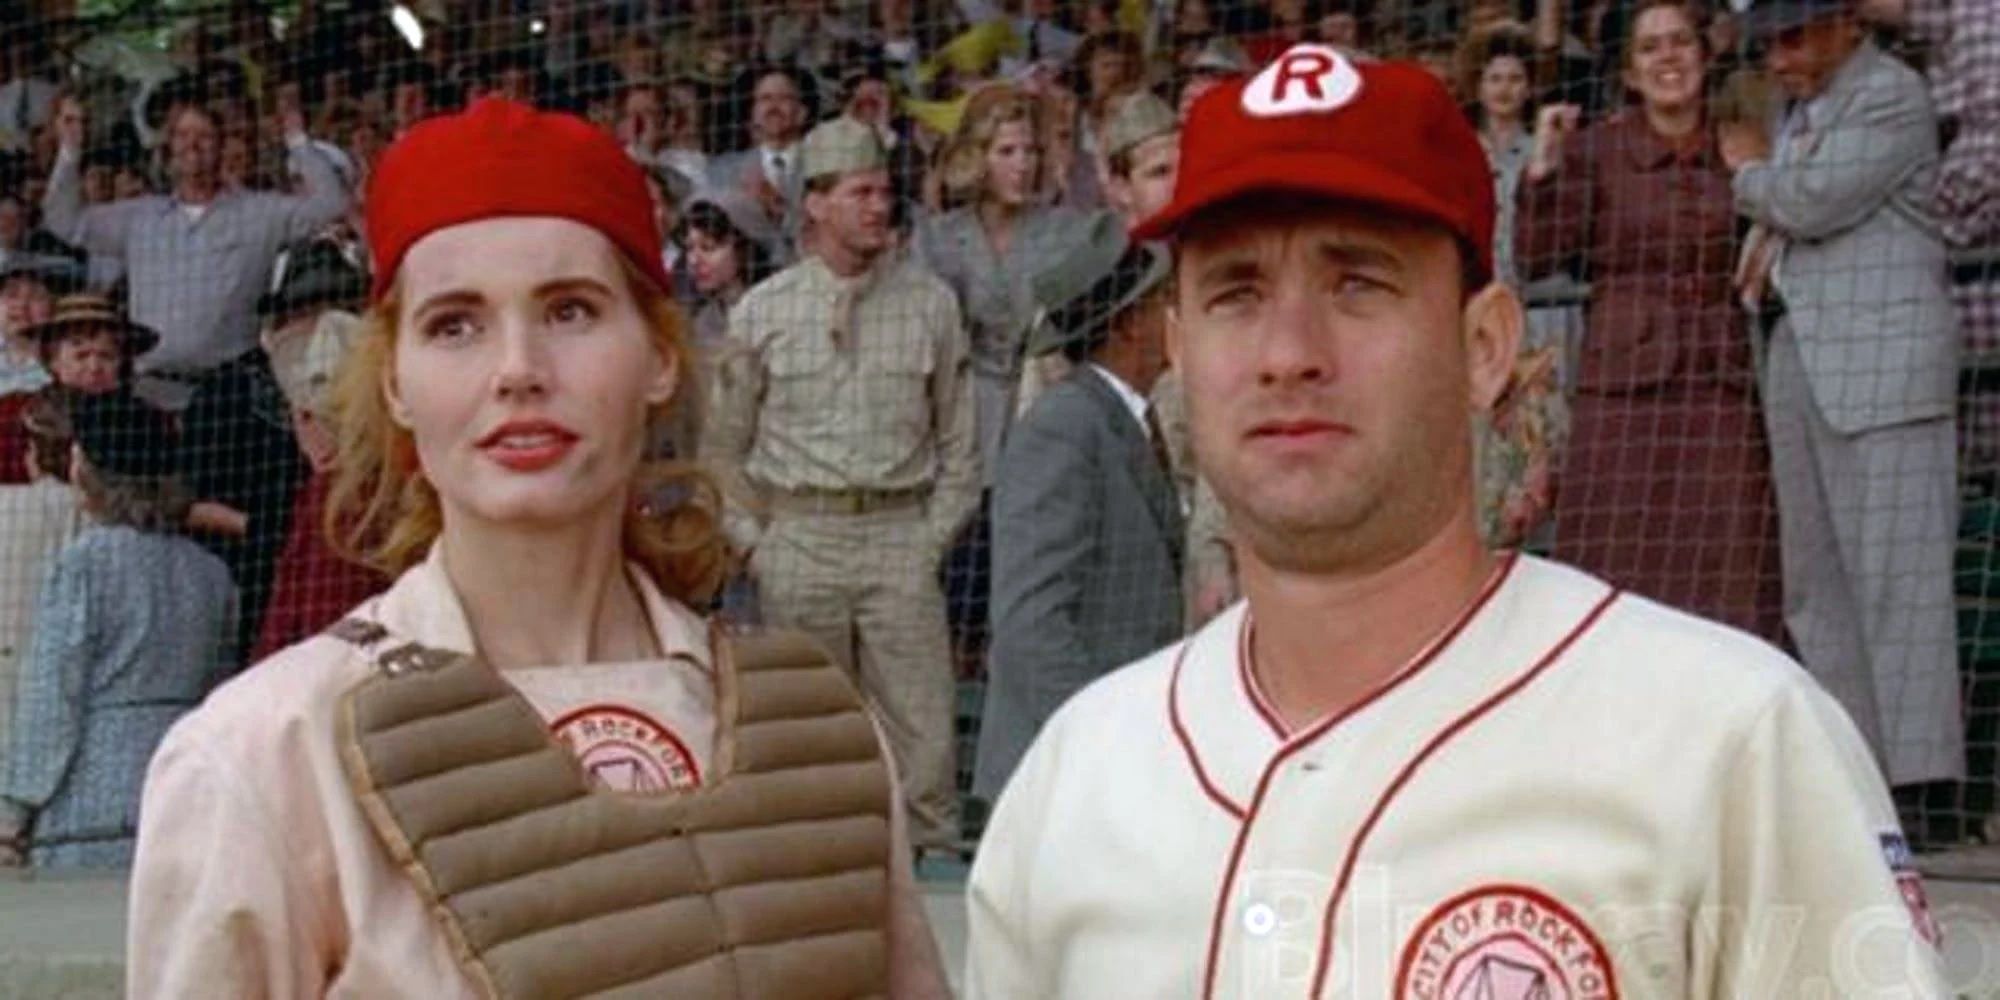 Tom Hanks and Geena Davis in A League of Their Own